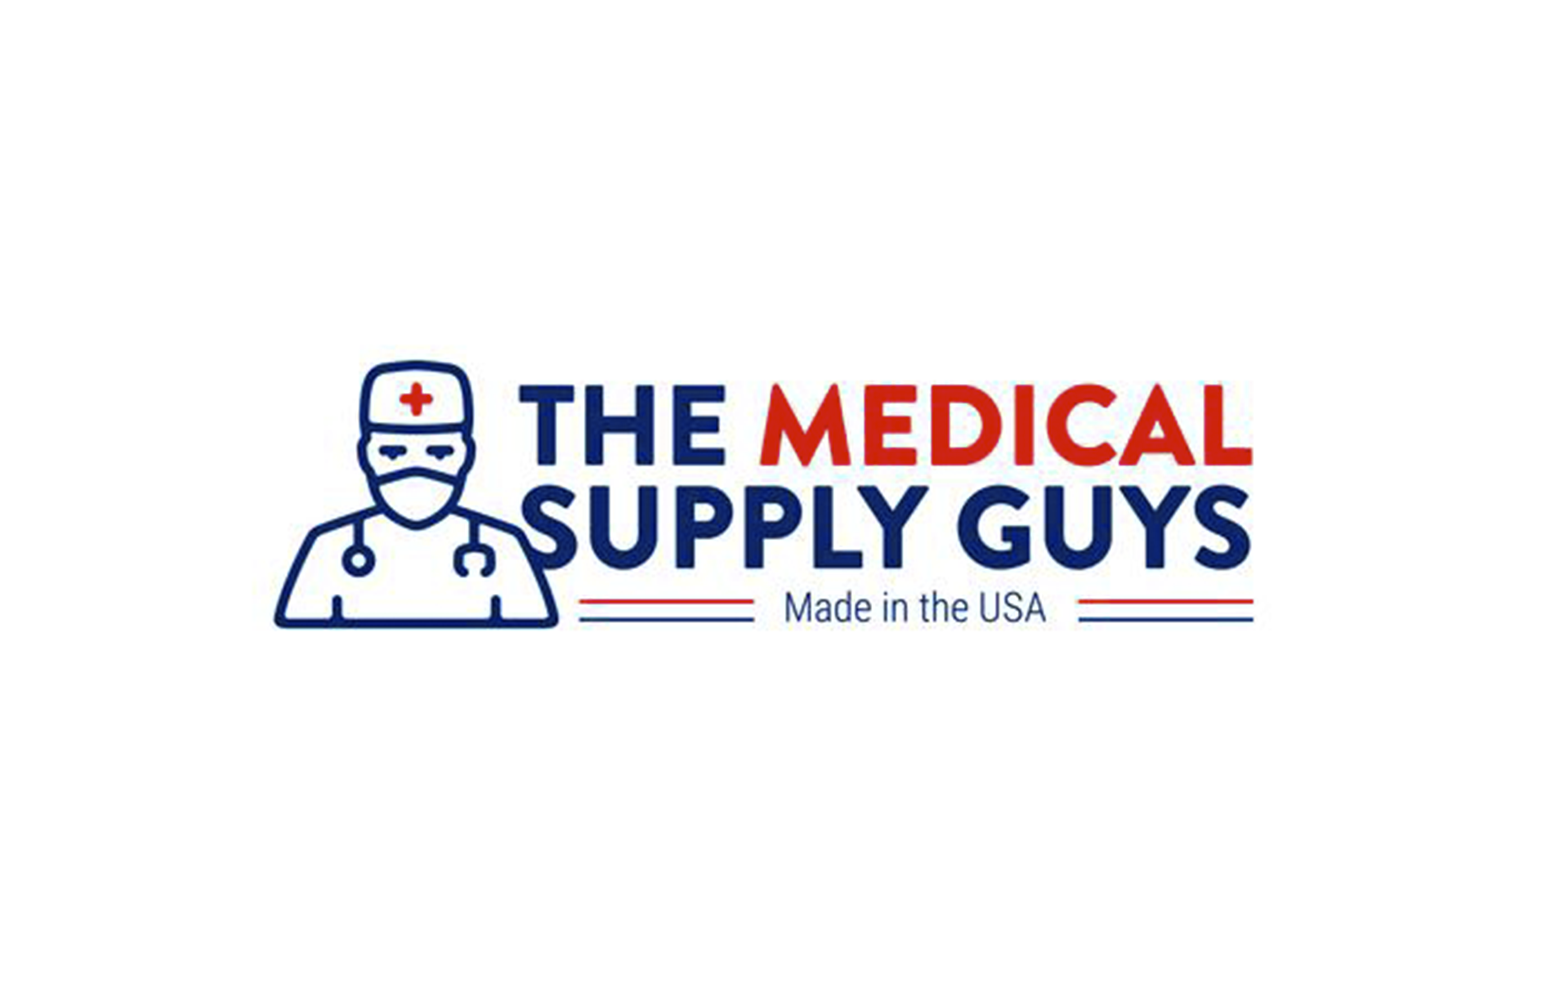 The Medical Supply Guys